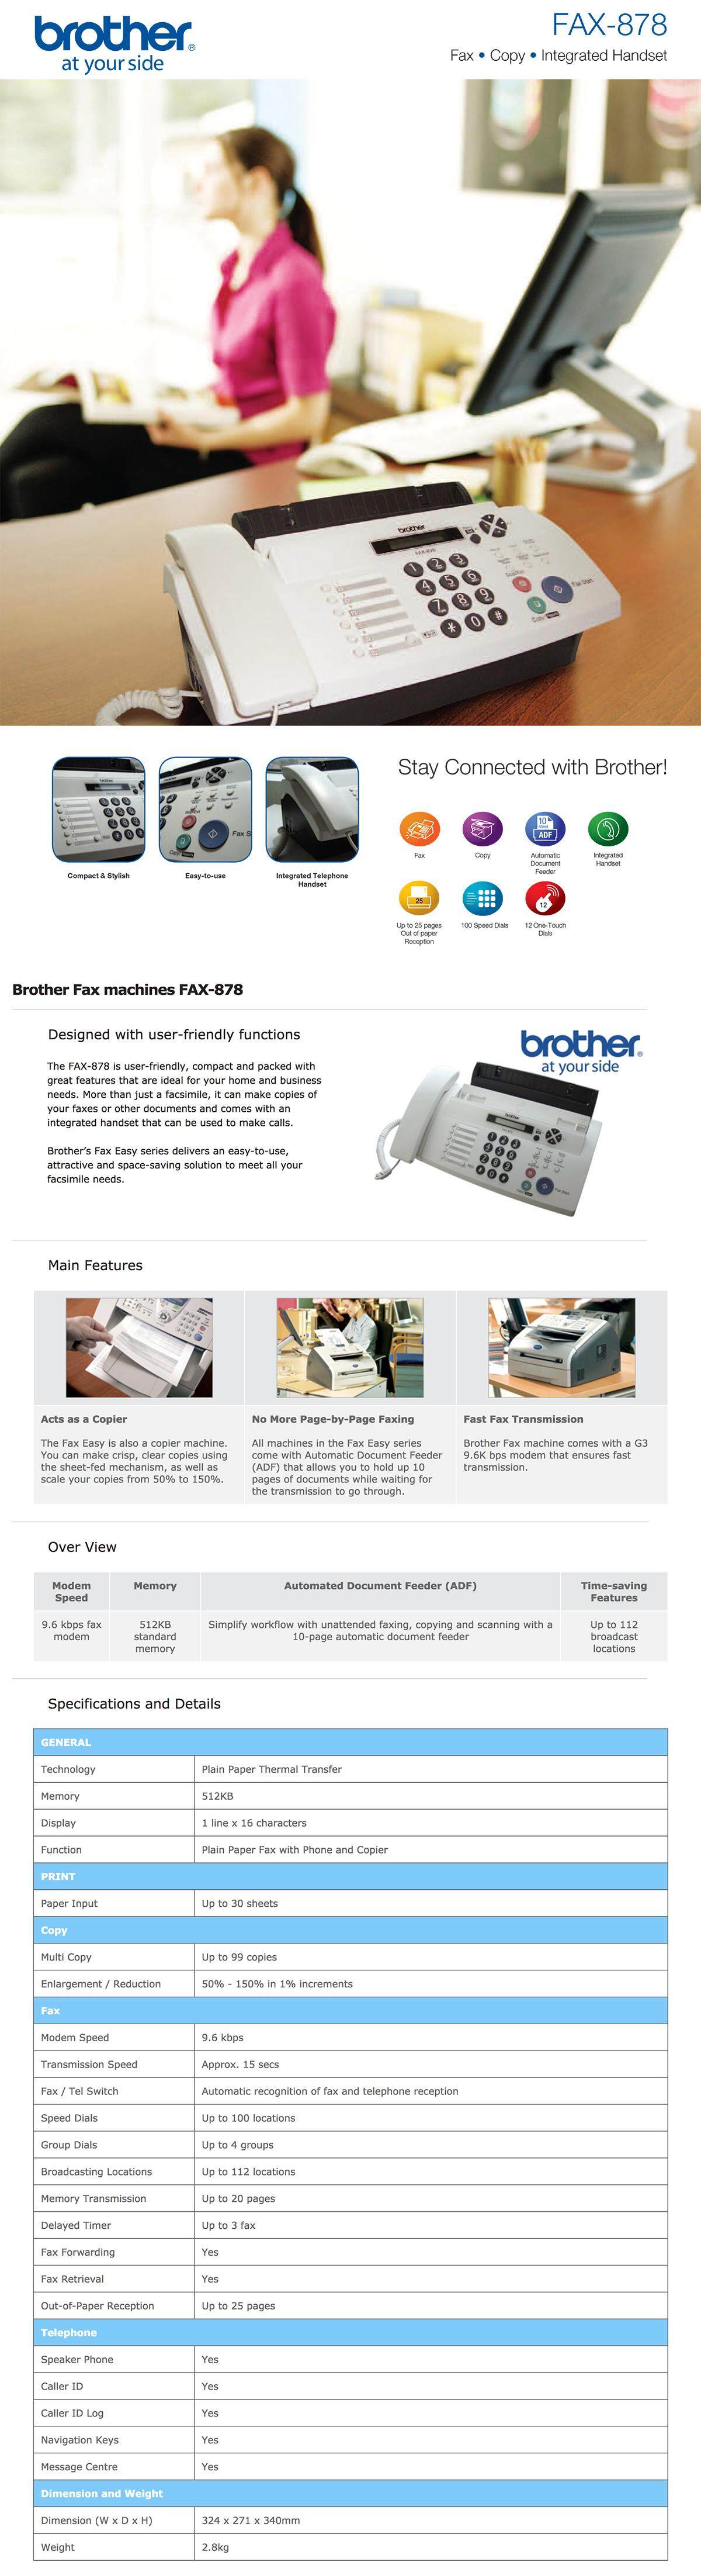 brother-fax-236-fax236-fax-236se-fax-machine-thermal-fax-machine-with-phone-description.jpg